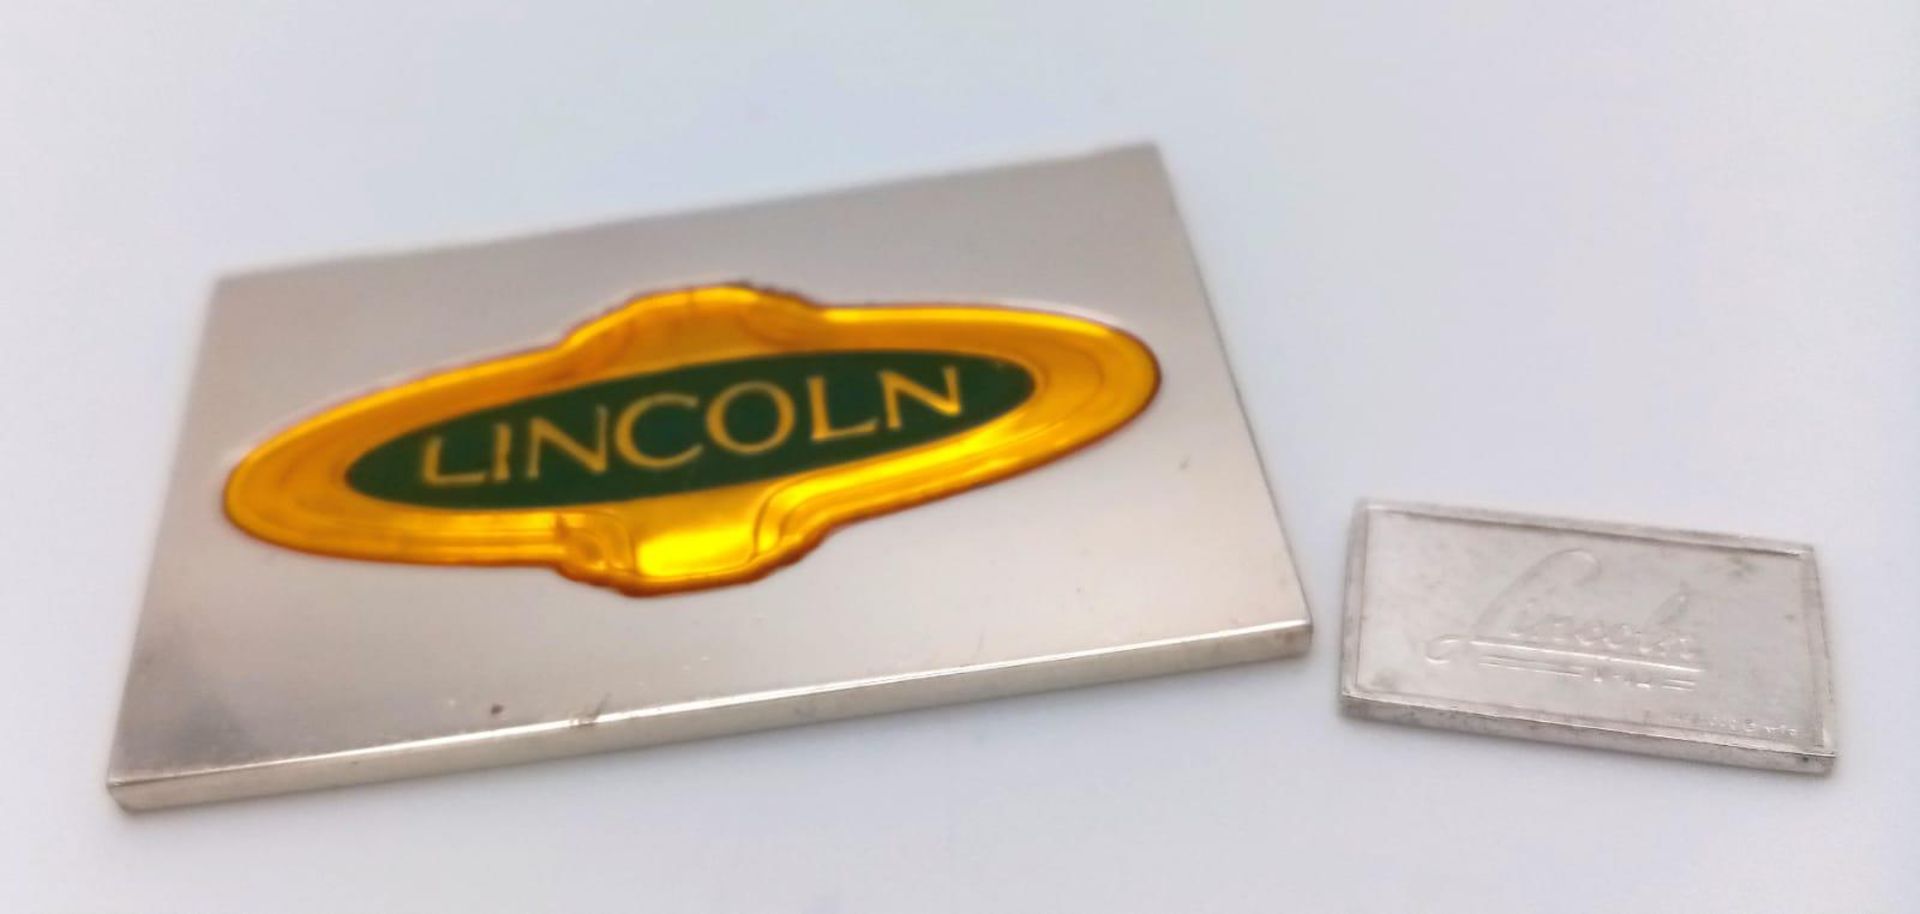 2 X STERLING SILVER AND ENAMEL LINCOLN CAR MANUFACTURER PLAQUES, MADE IN UNITED STATES USA, WEIGHT